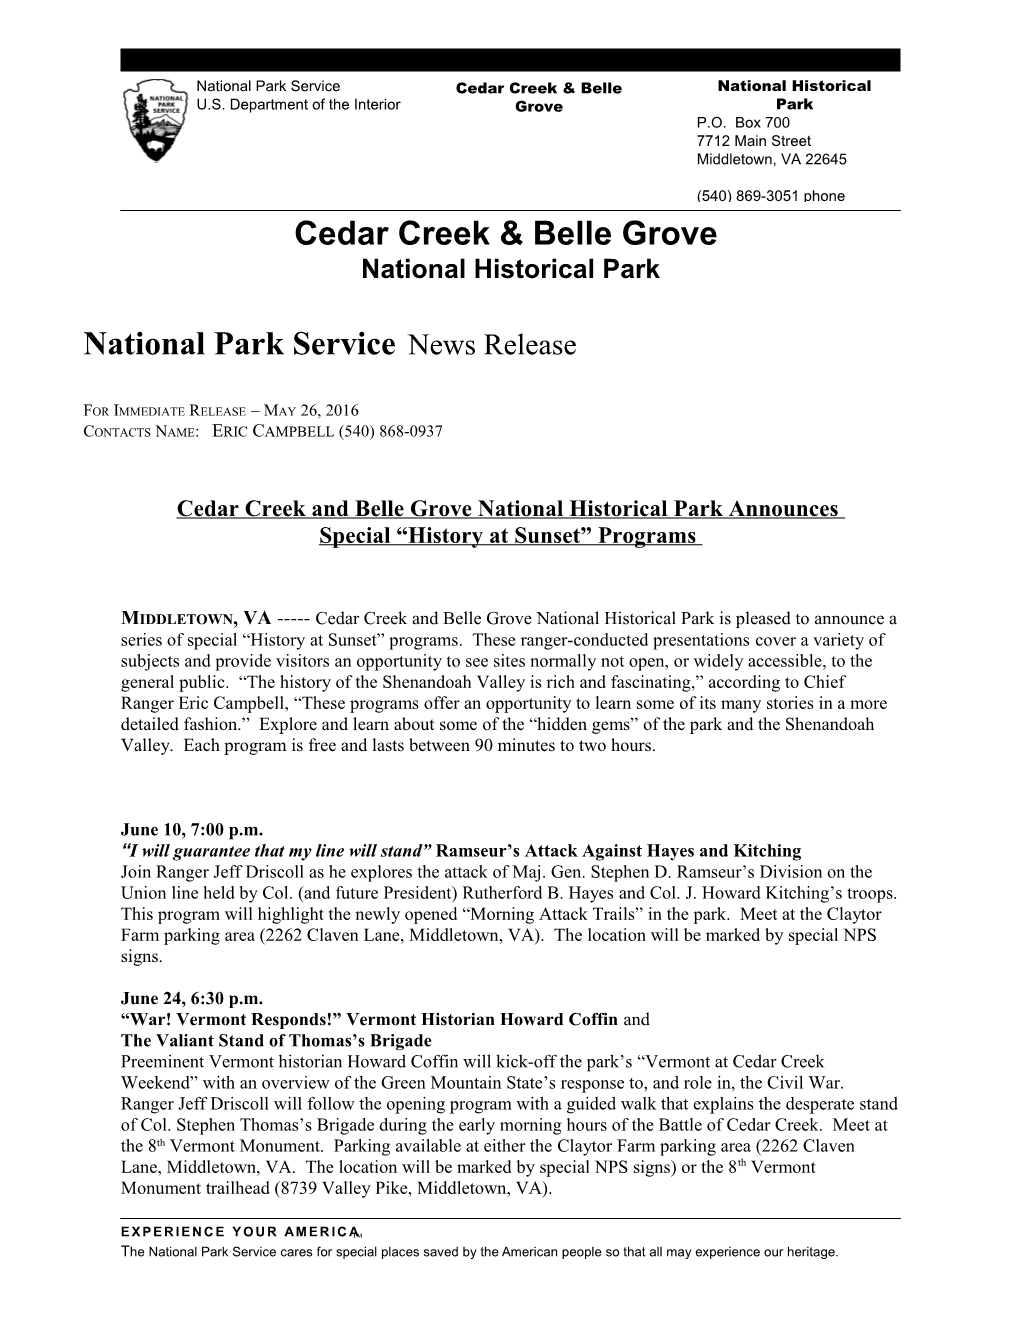 National Park Service News Release s1